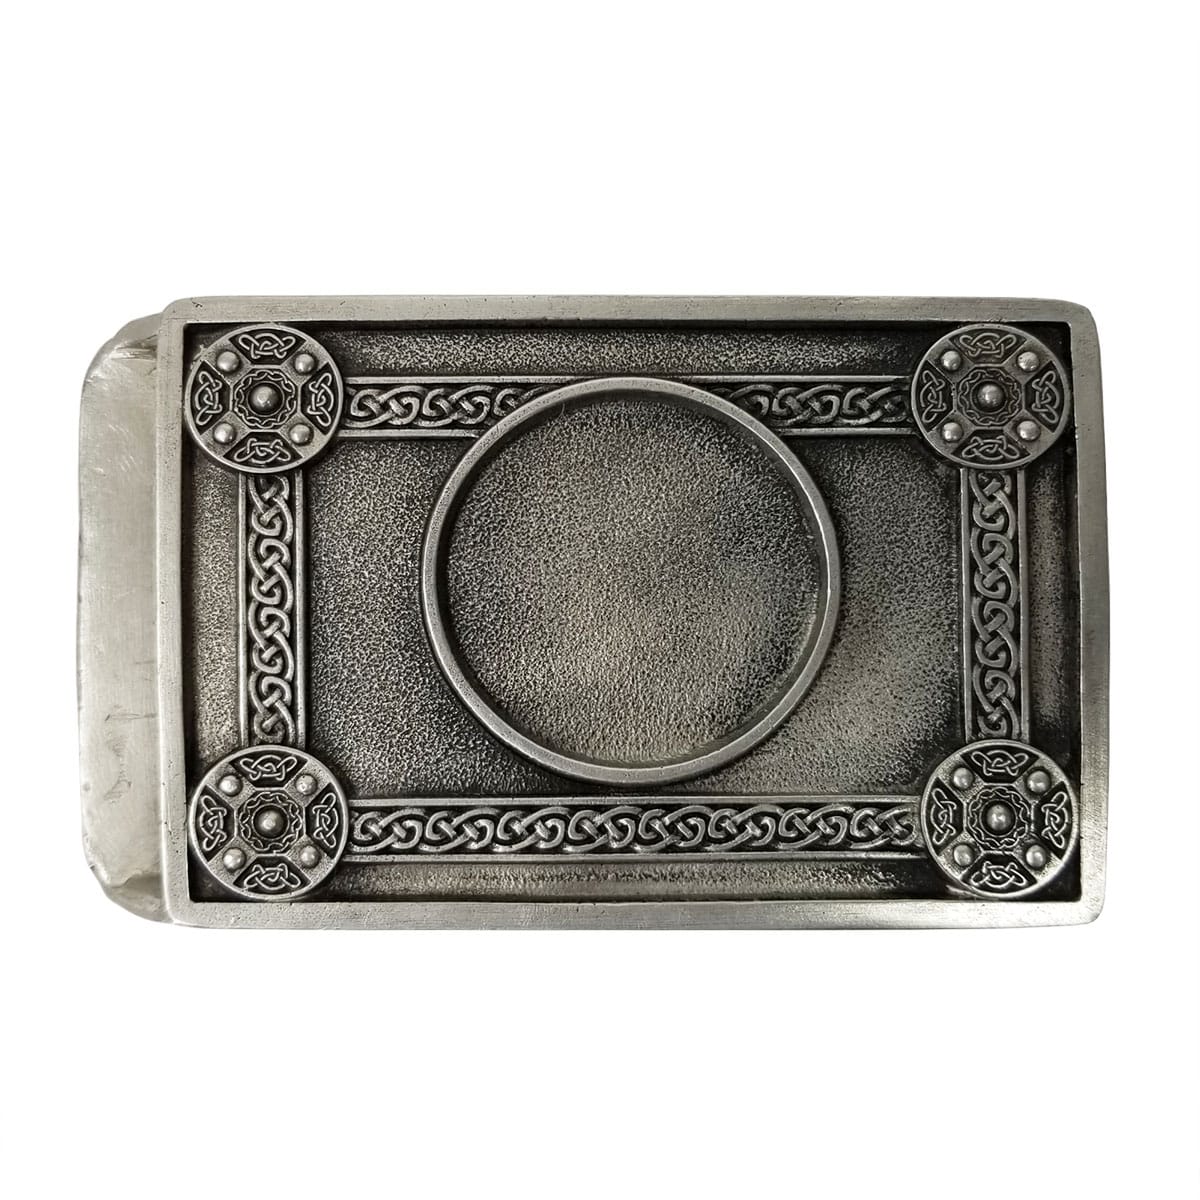 Rectangular Pewter Kilt Belt Buckle featuring intricate Celtic knot patterns and four circular designs, one at each corner. The center has a plain circular area.